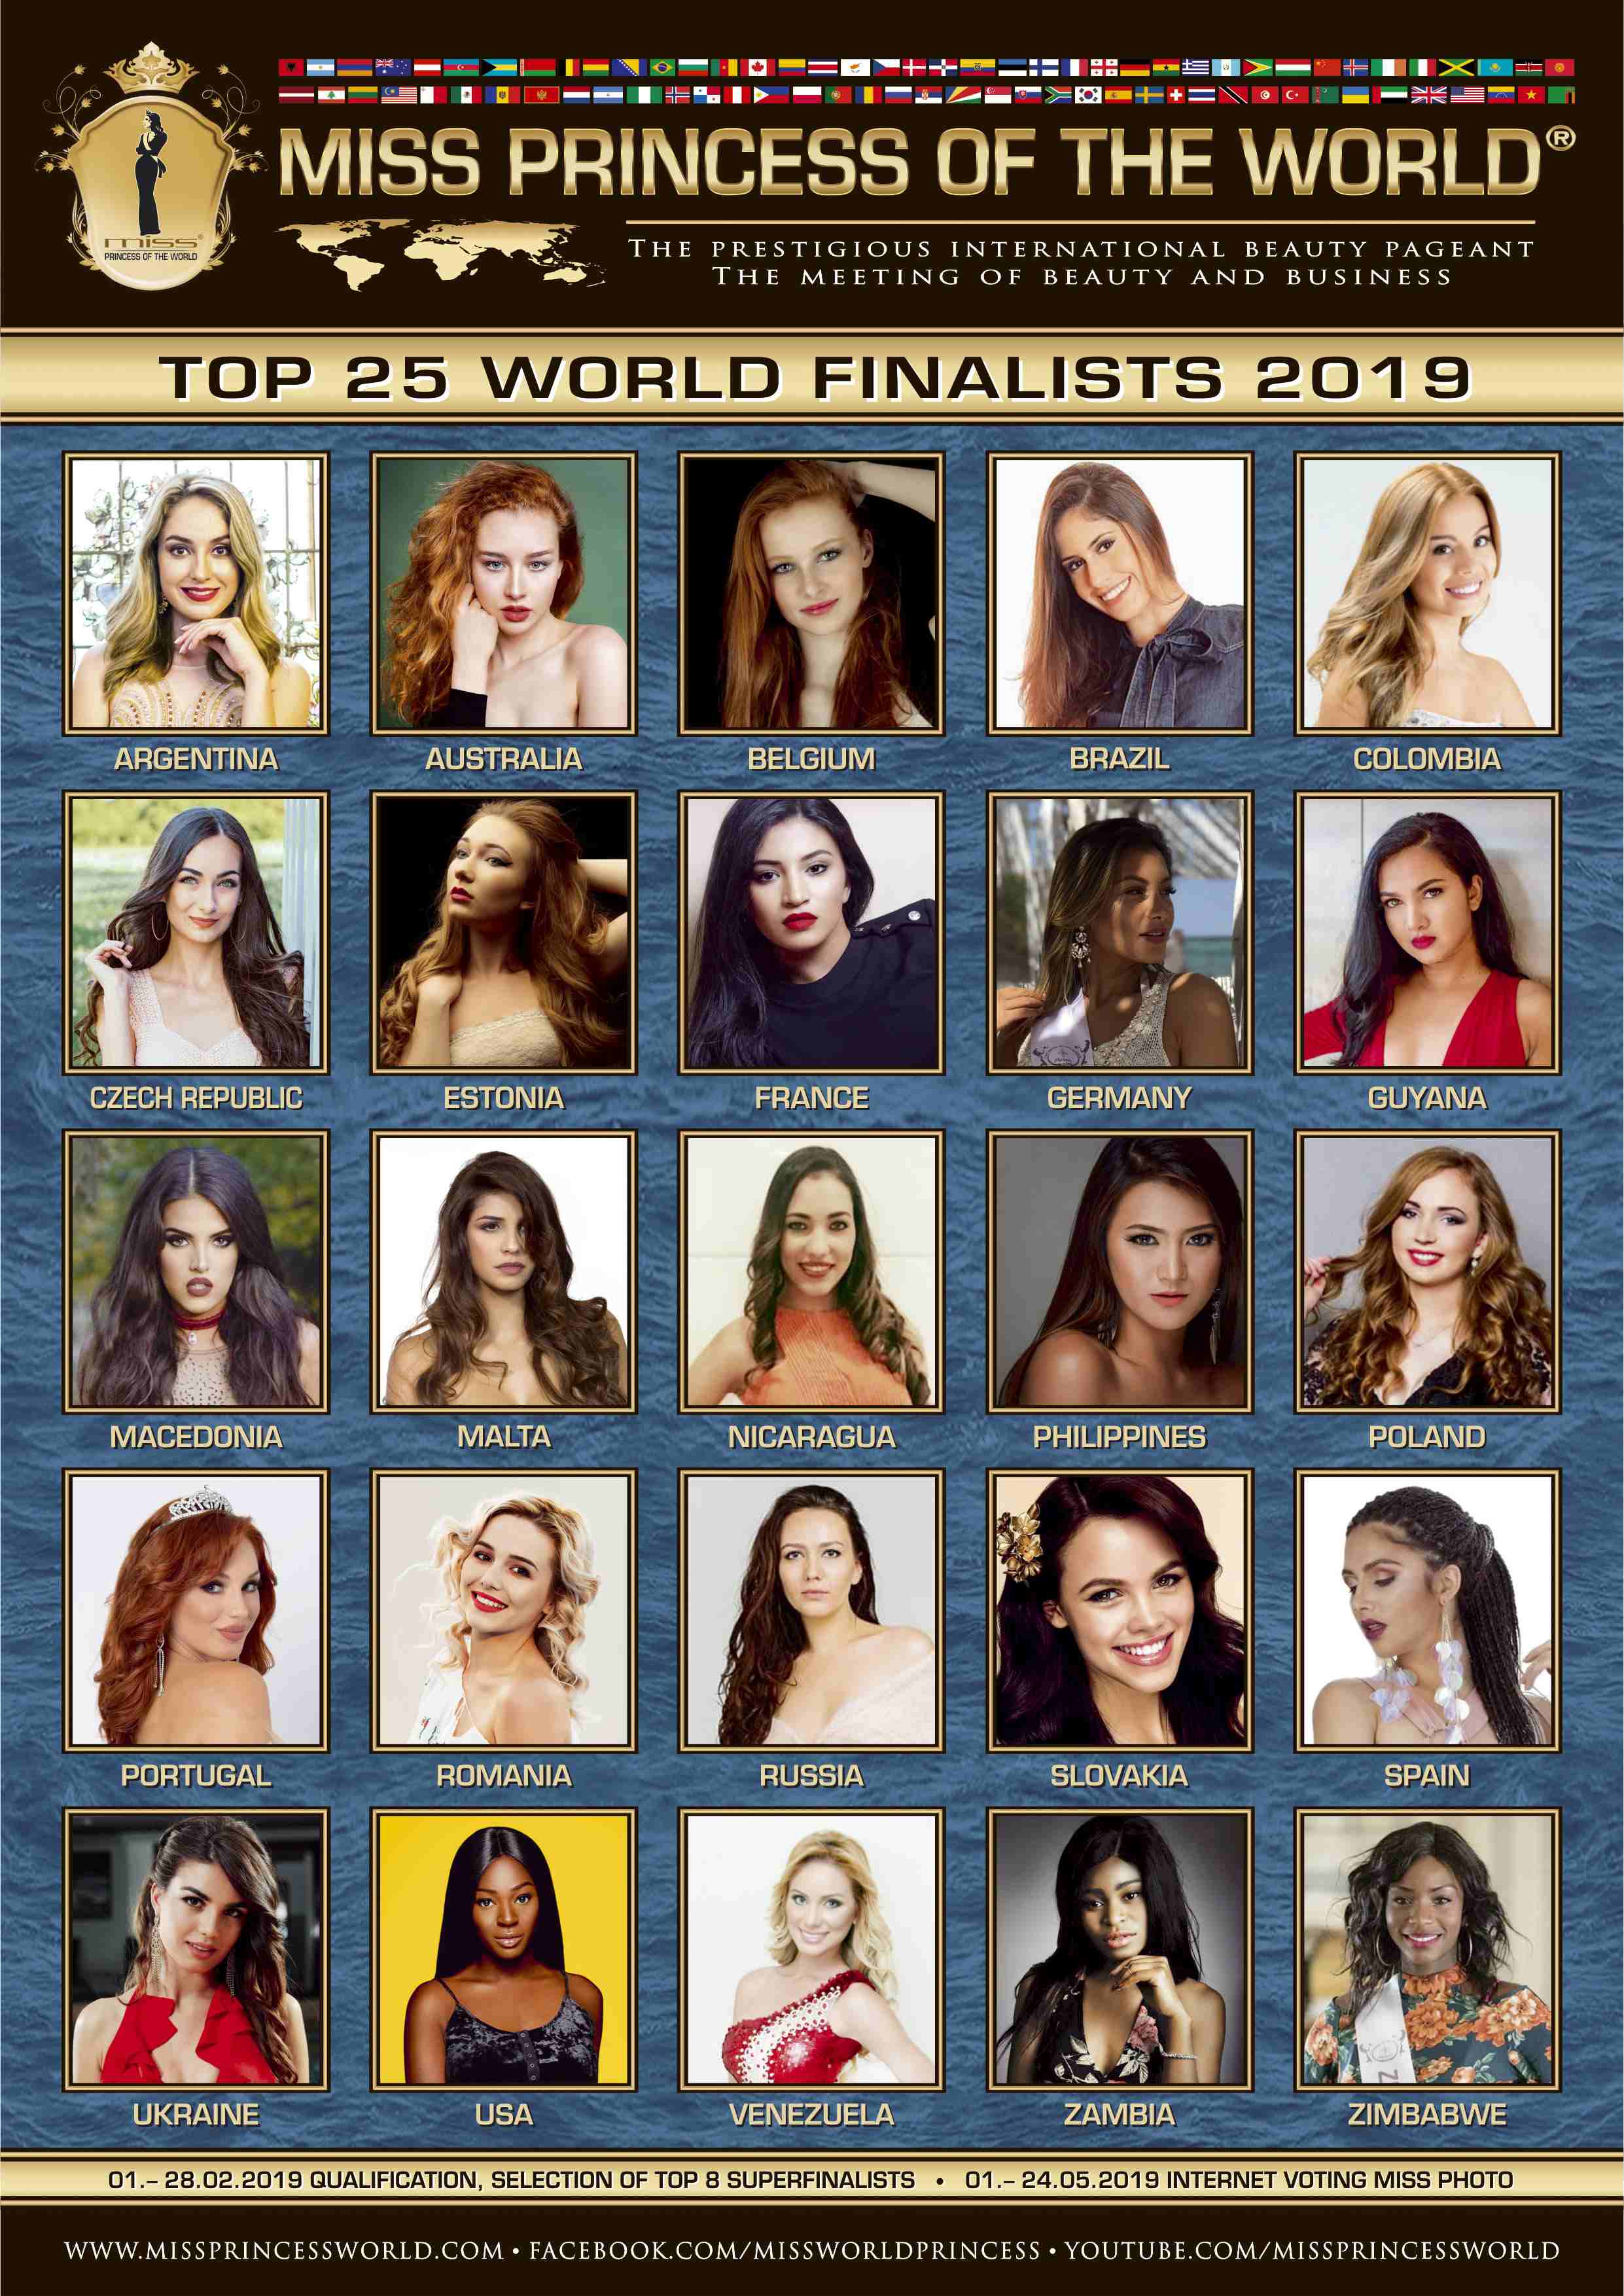 SELECTION OF TOP 25 WORLD FINALISTS 2019